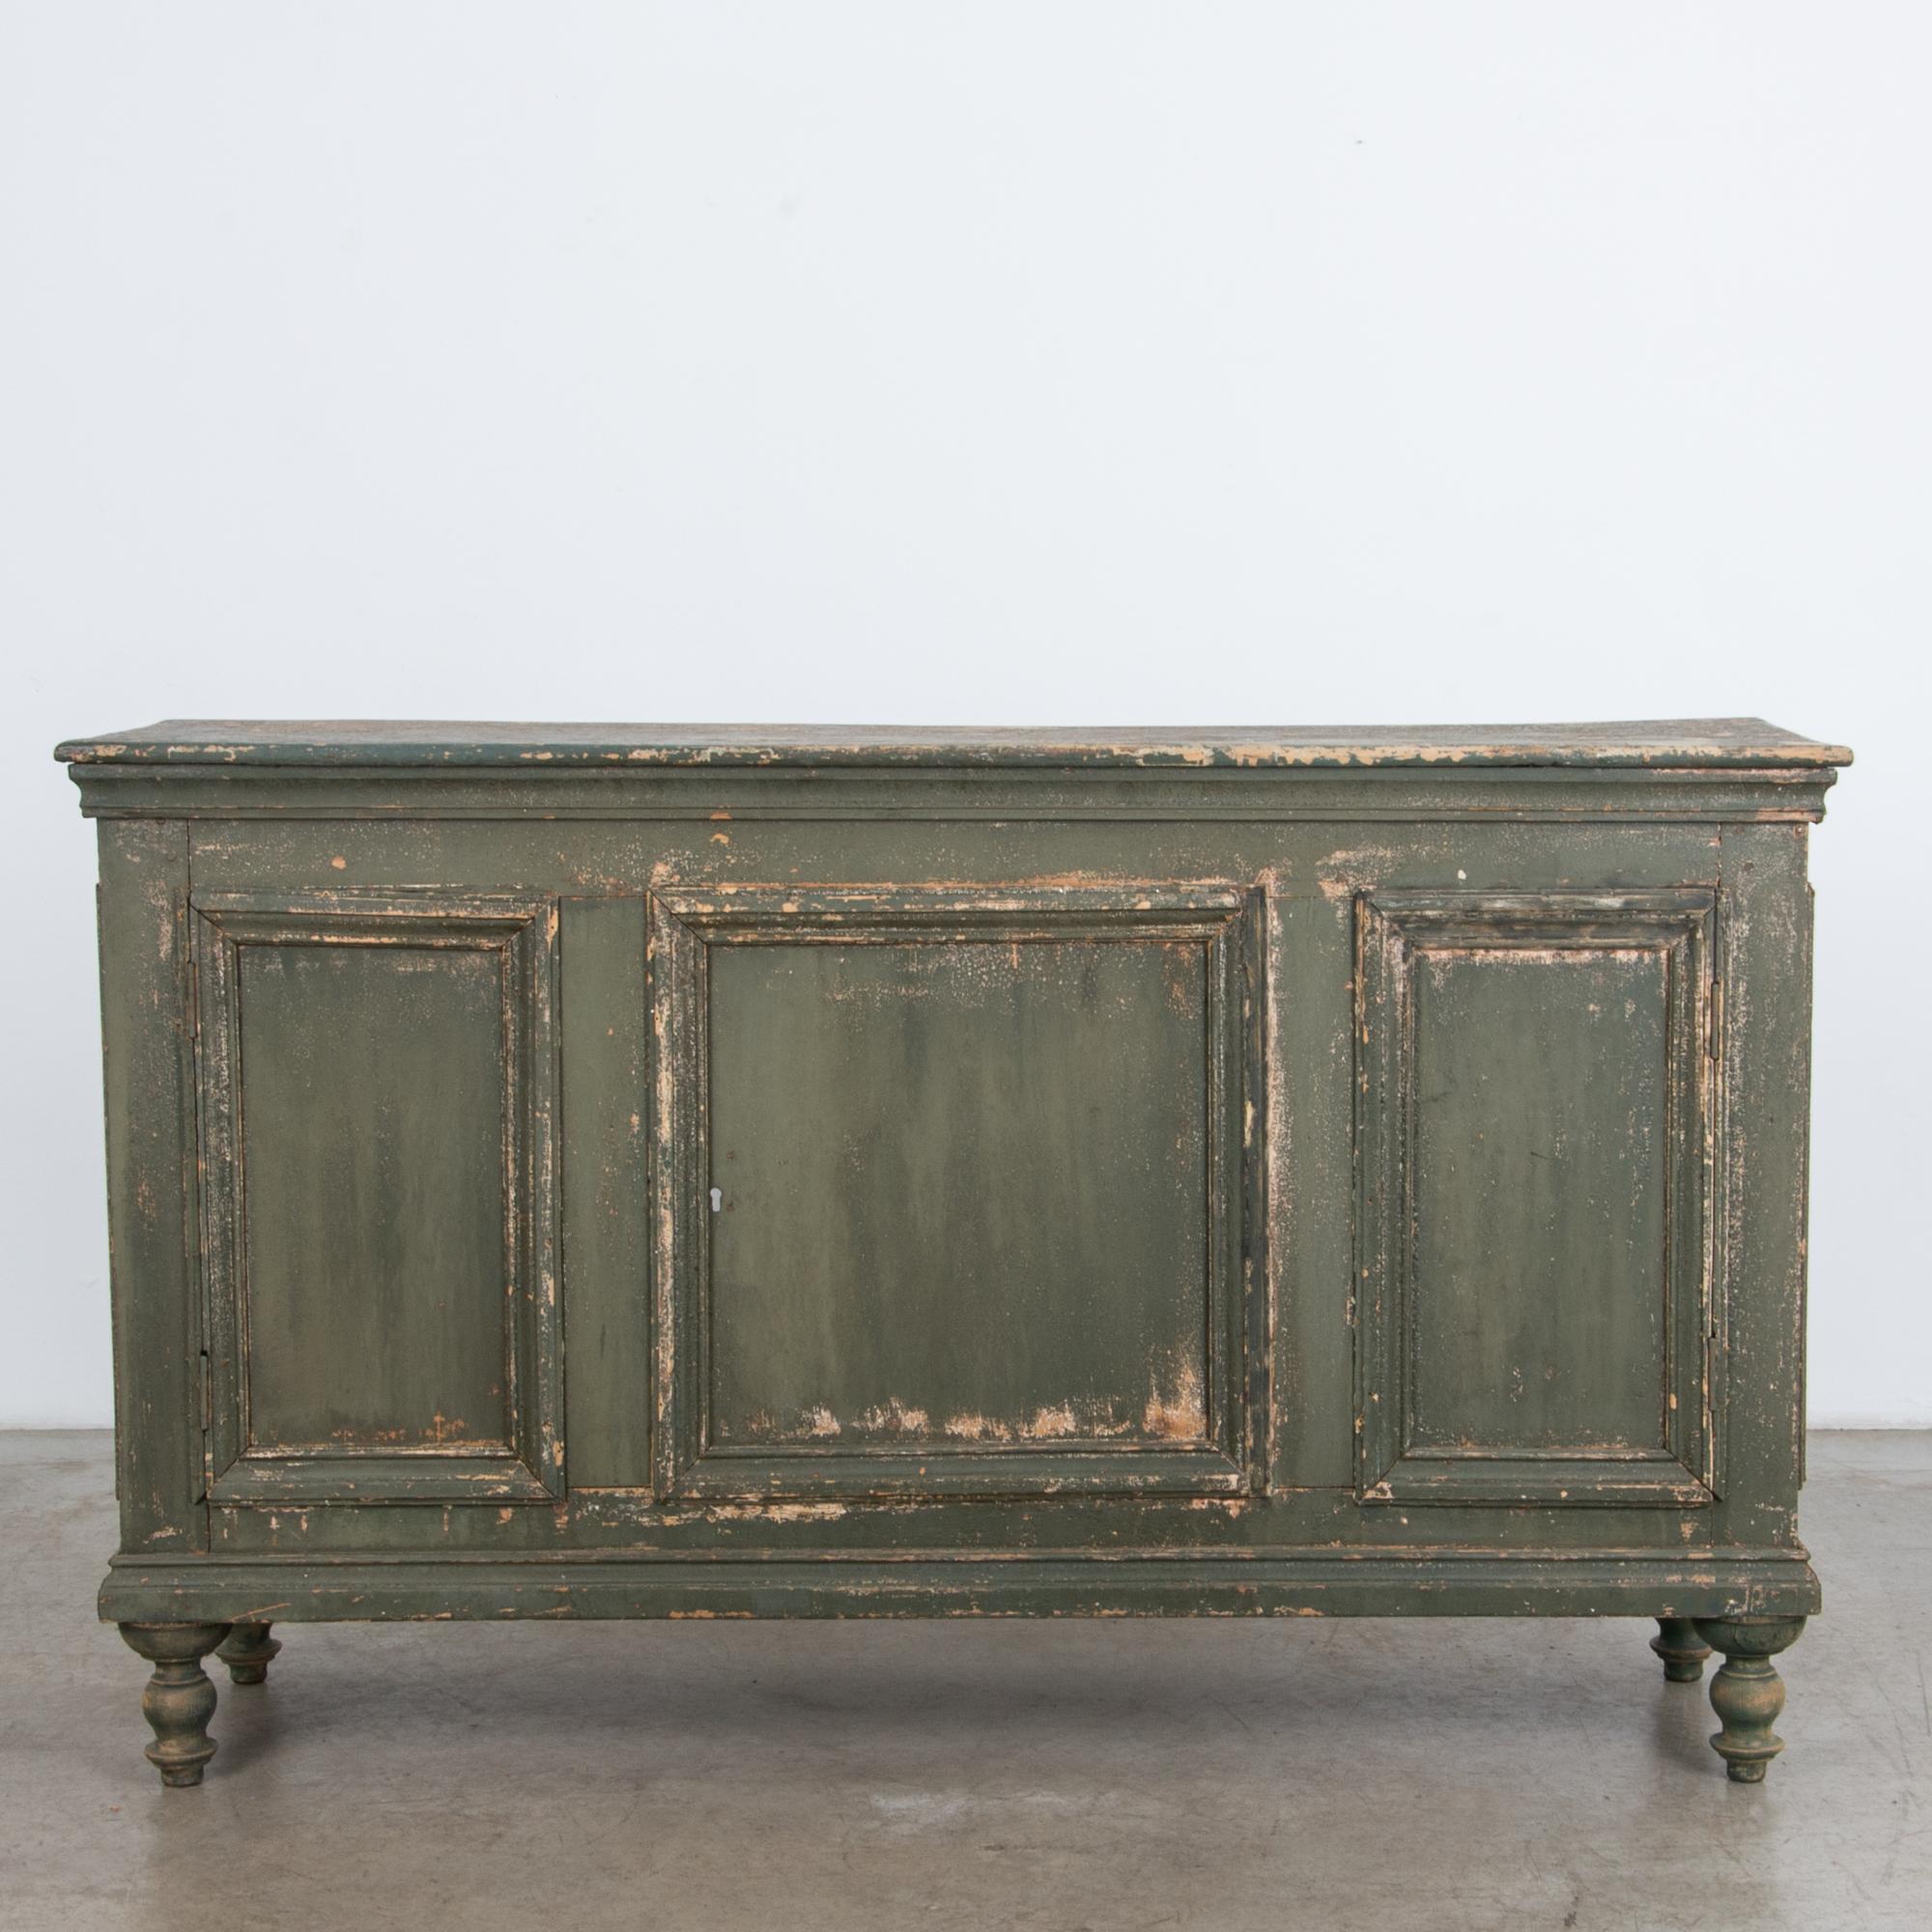 An intriguing shop counter from France, circa 1900. A textured green paint, worn by time, dresses a frame and panel case resting on decorative turned feet. This is a unique piece with great character, converted from a three door buffet to a solid